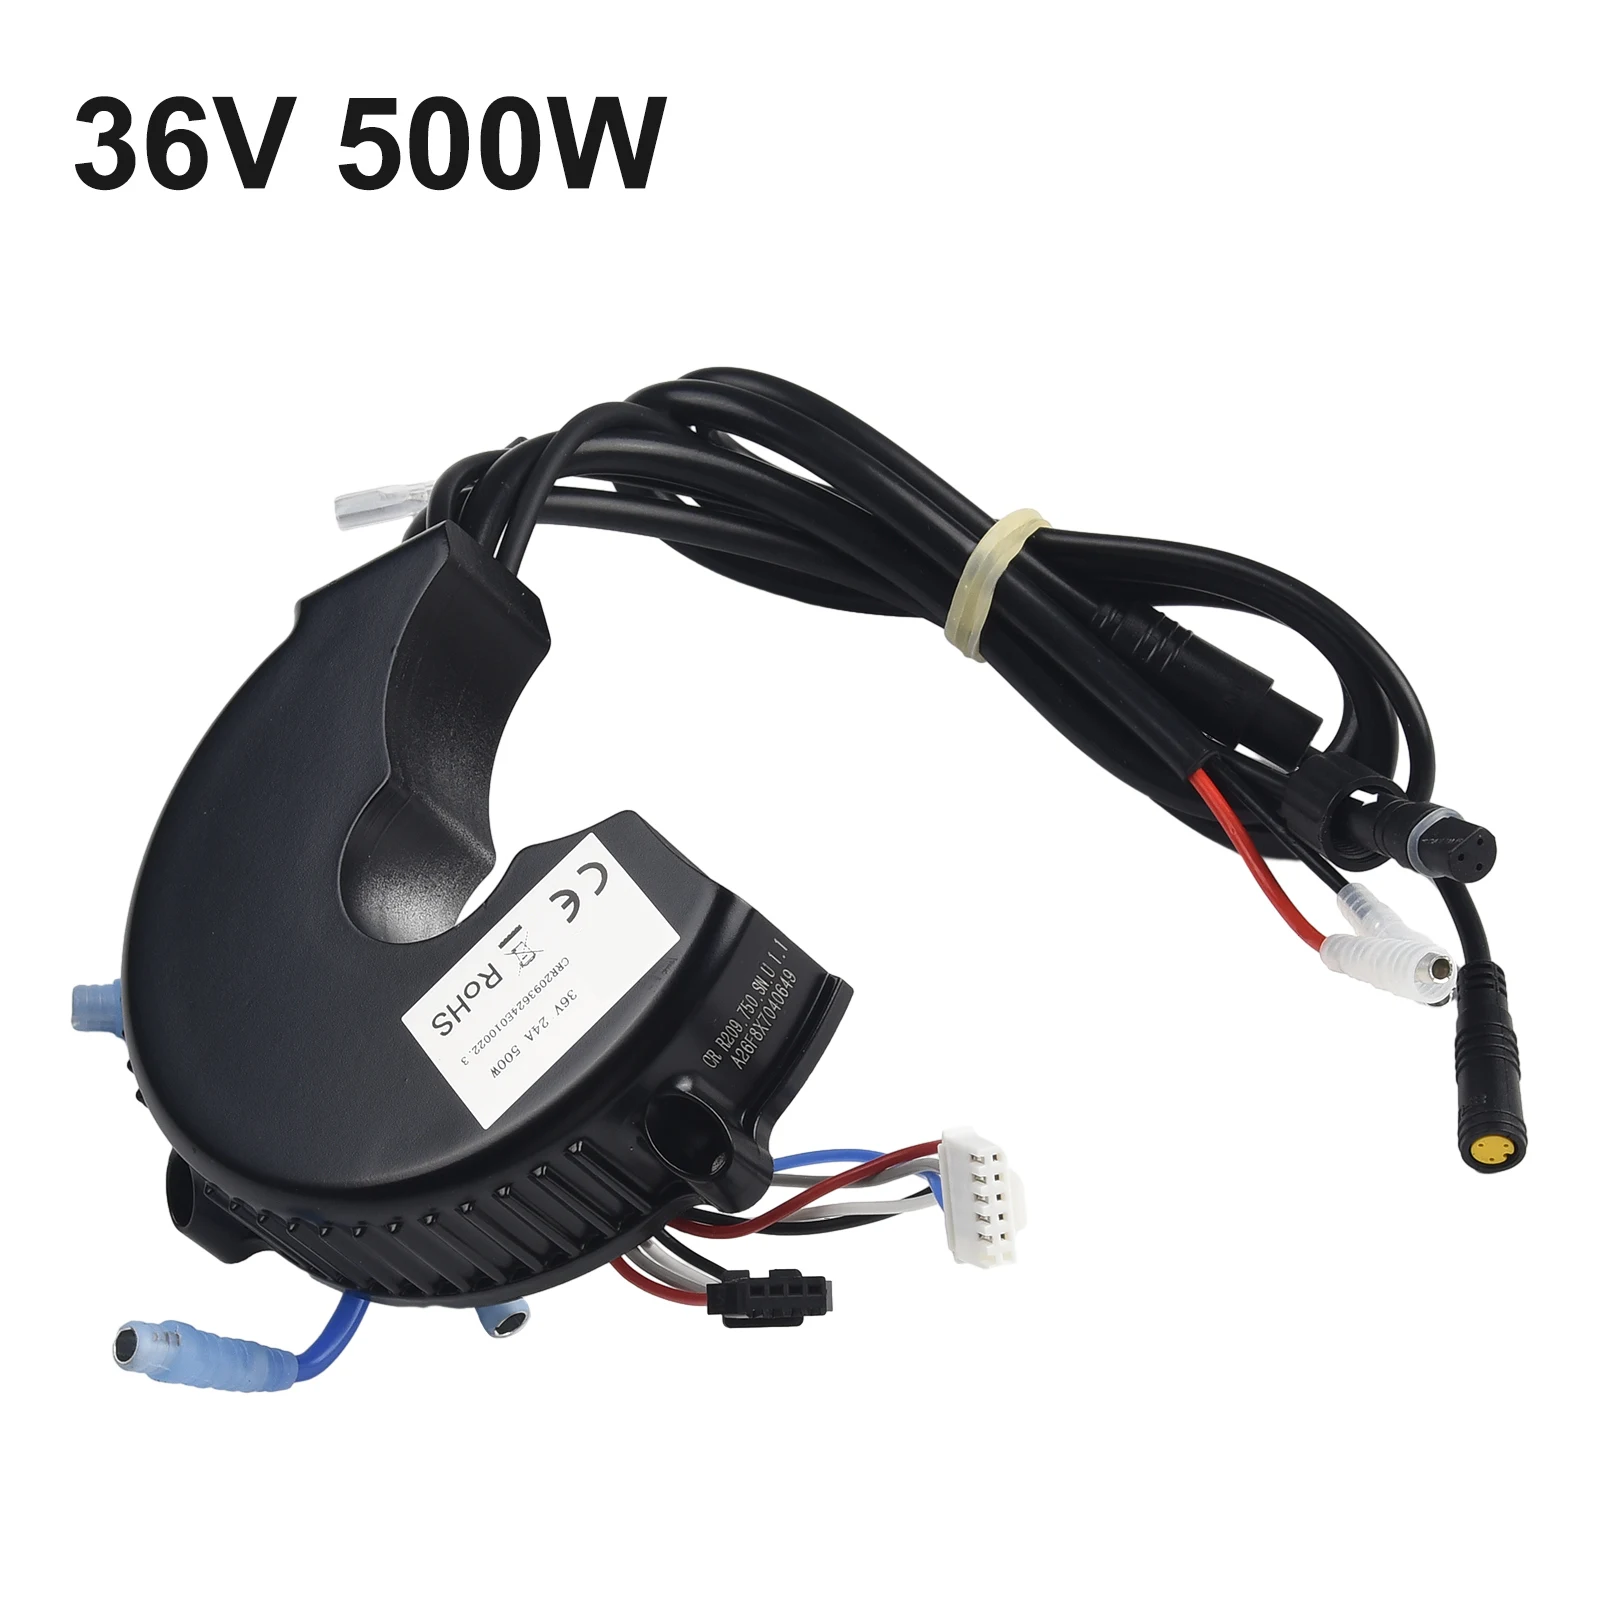 

48V 750W 500W Motor Controller For Bafang For 8FUN MidDrive Motor Controller Replacement BBS0102 Ebike Accessories